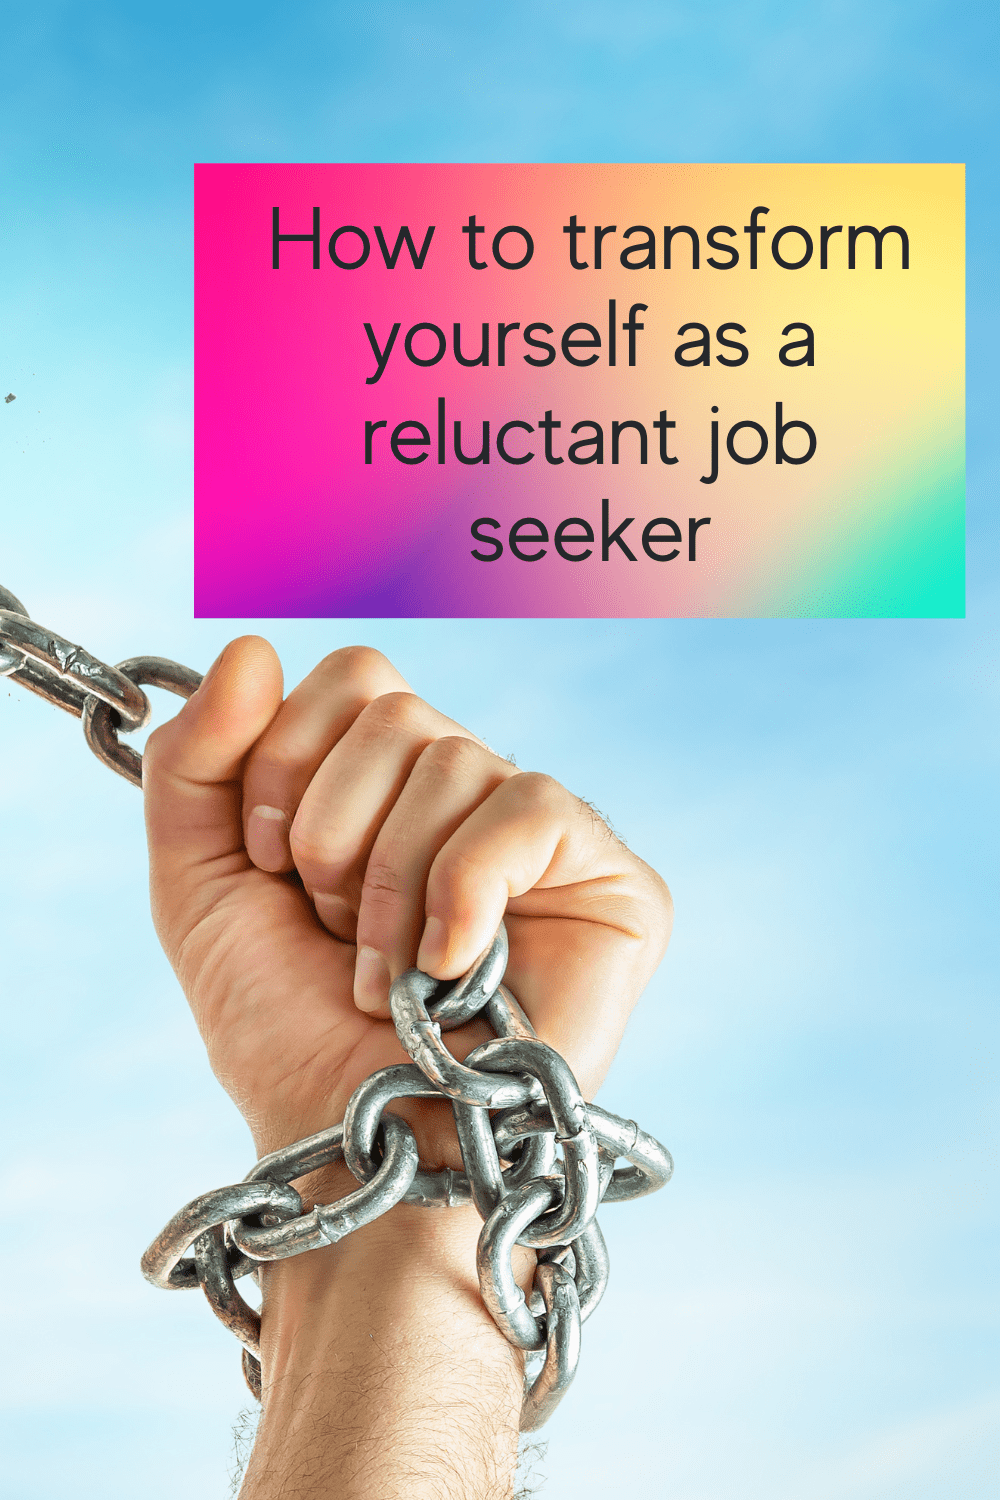 How to transform yourself as a reluctant job seeker